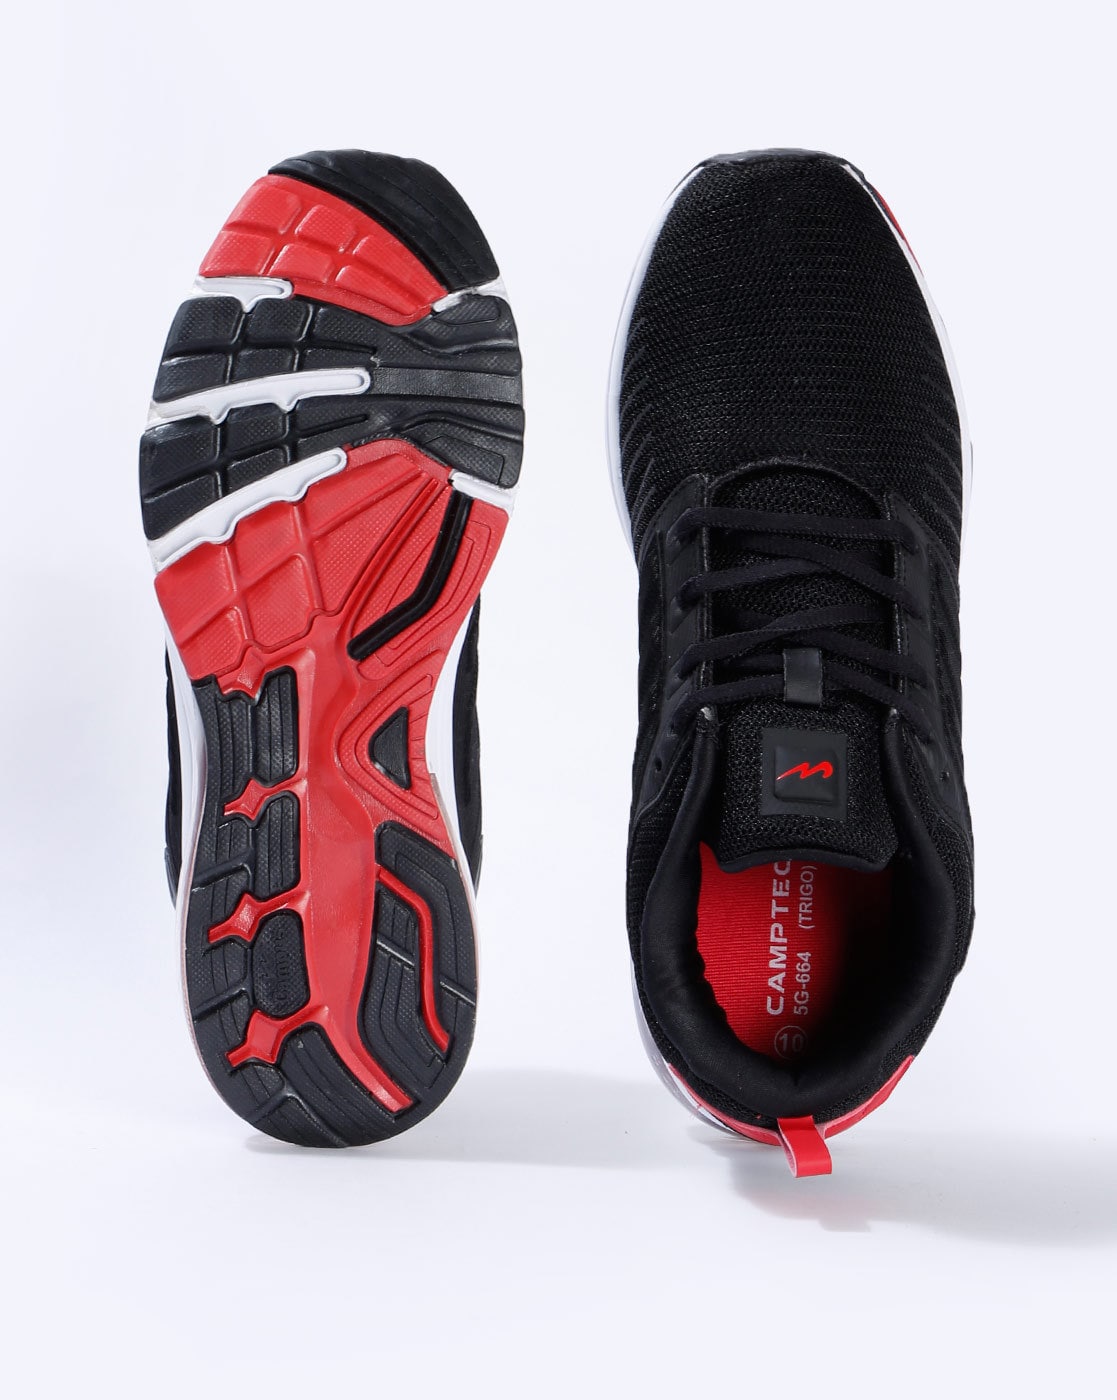 camptech shoes price